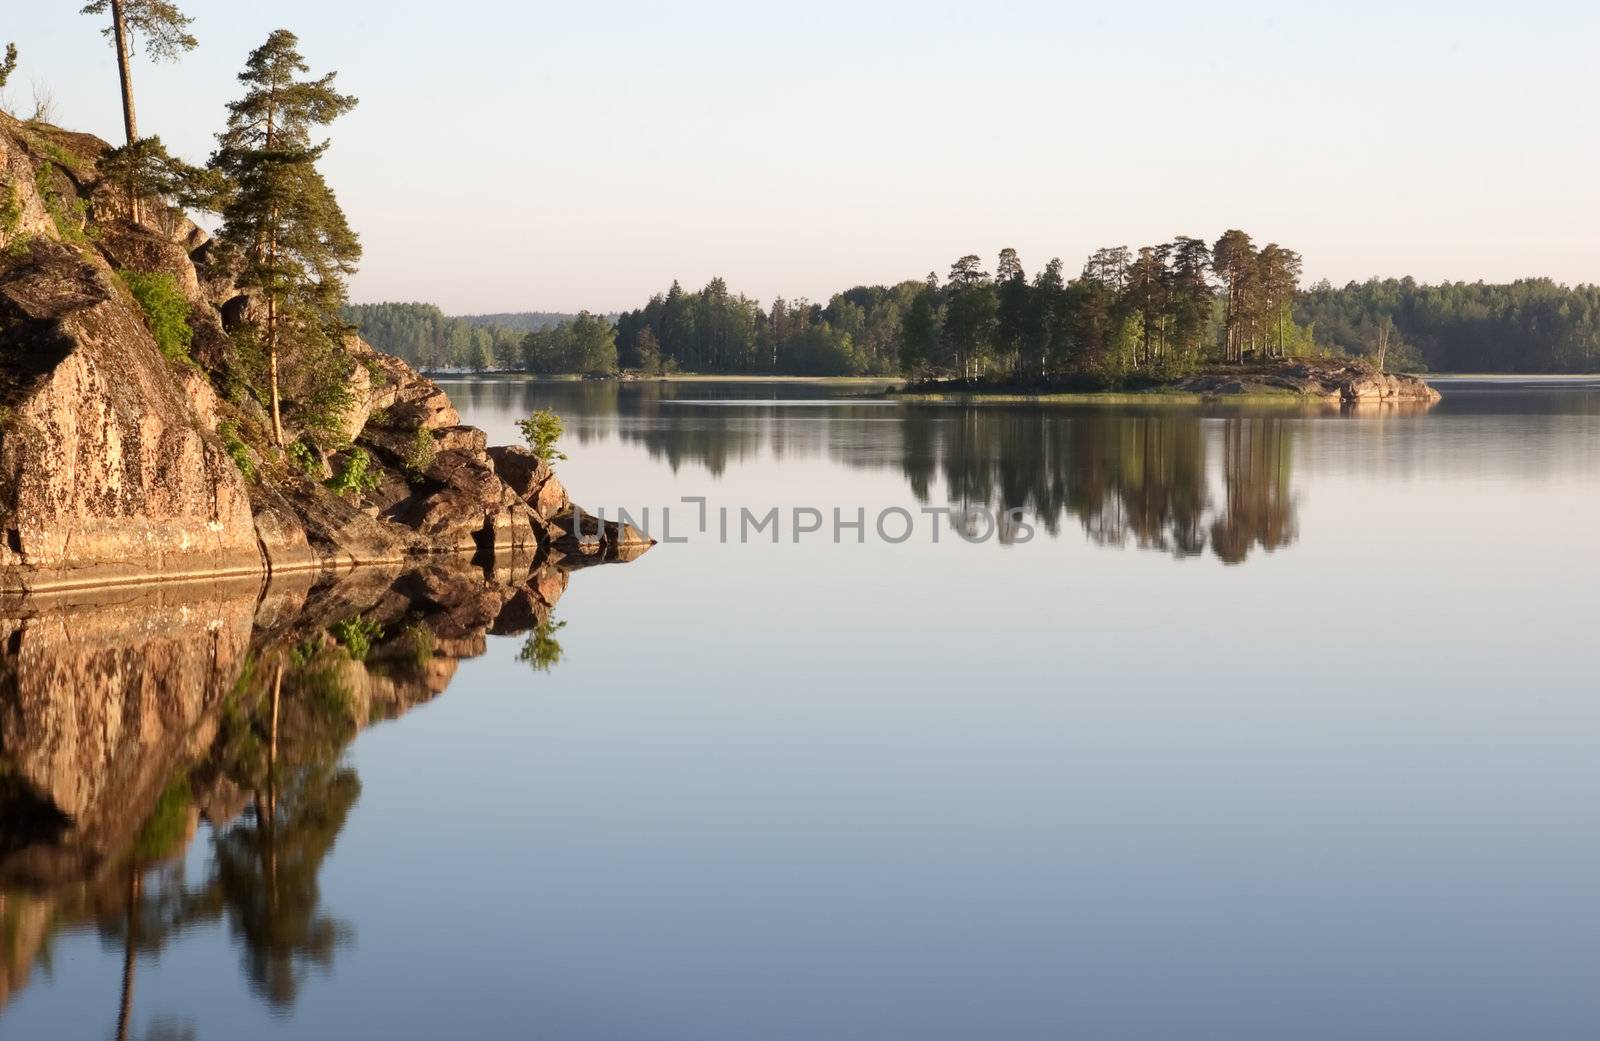 Russia, Vyborg, the Vyborg gulf. A landscape with a water table early in the morning